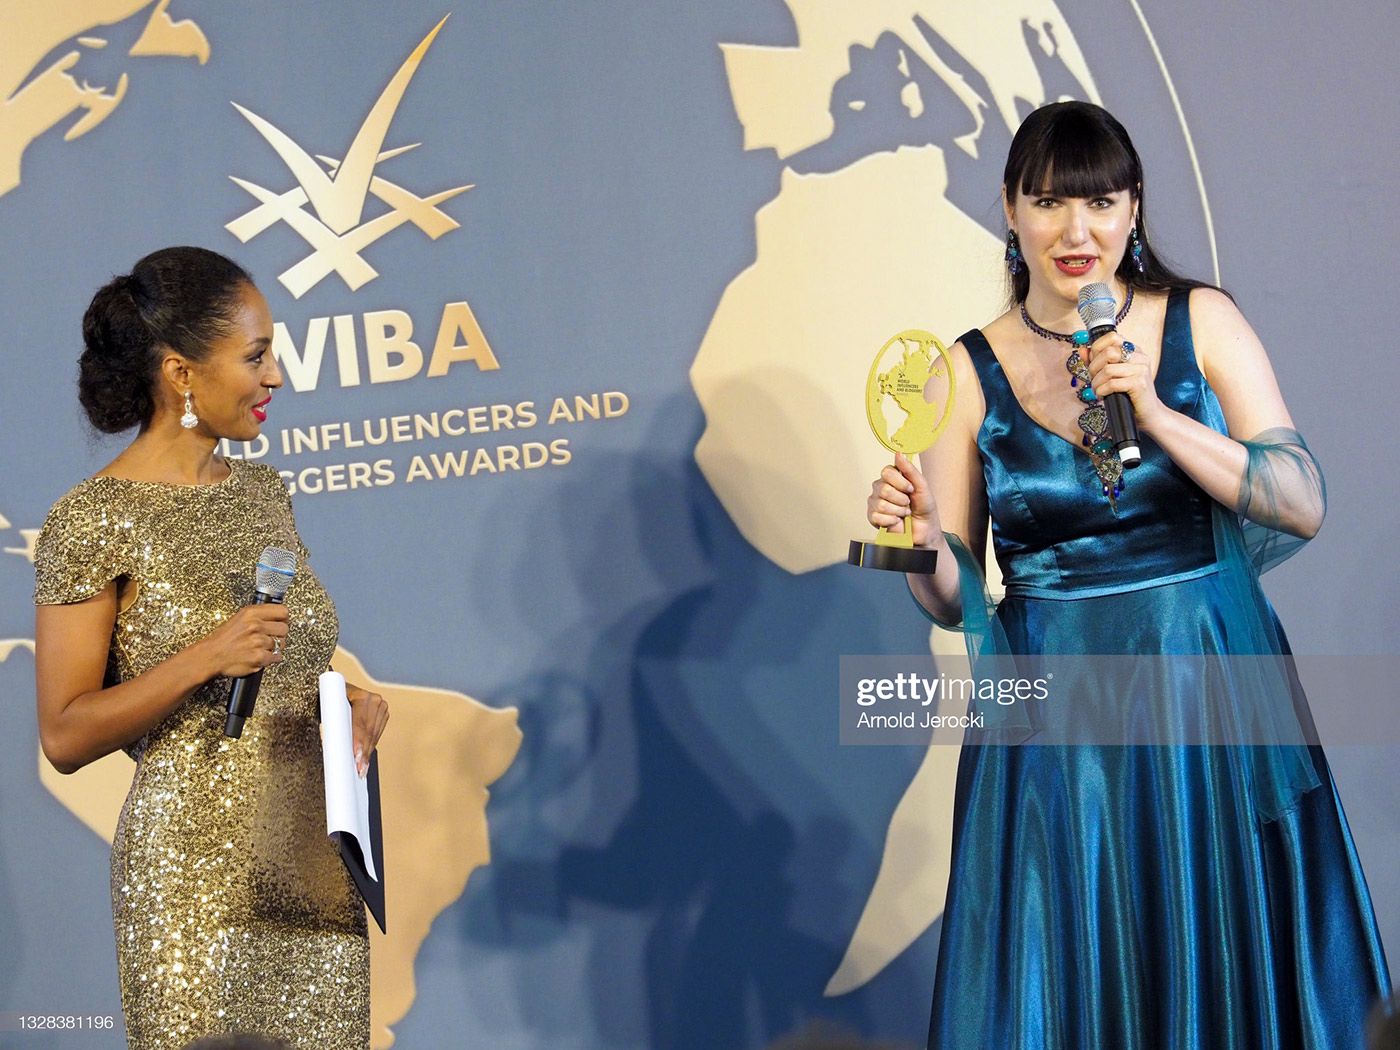 Katerina Perez receives the WIBA Jewellery Influencer Award during the Cannes Film Festival 2021